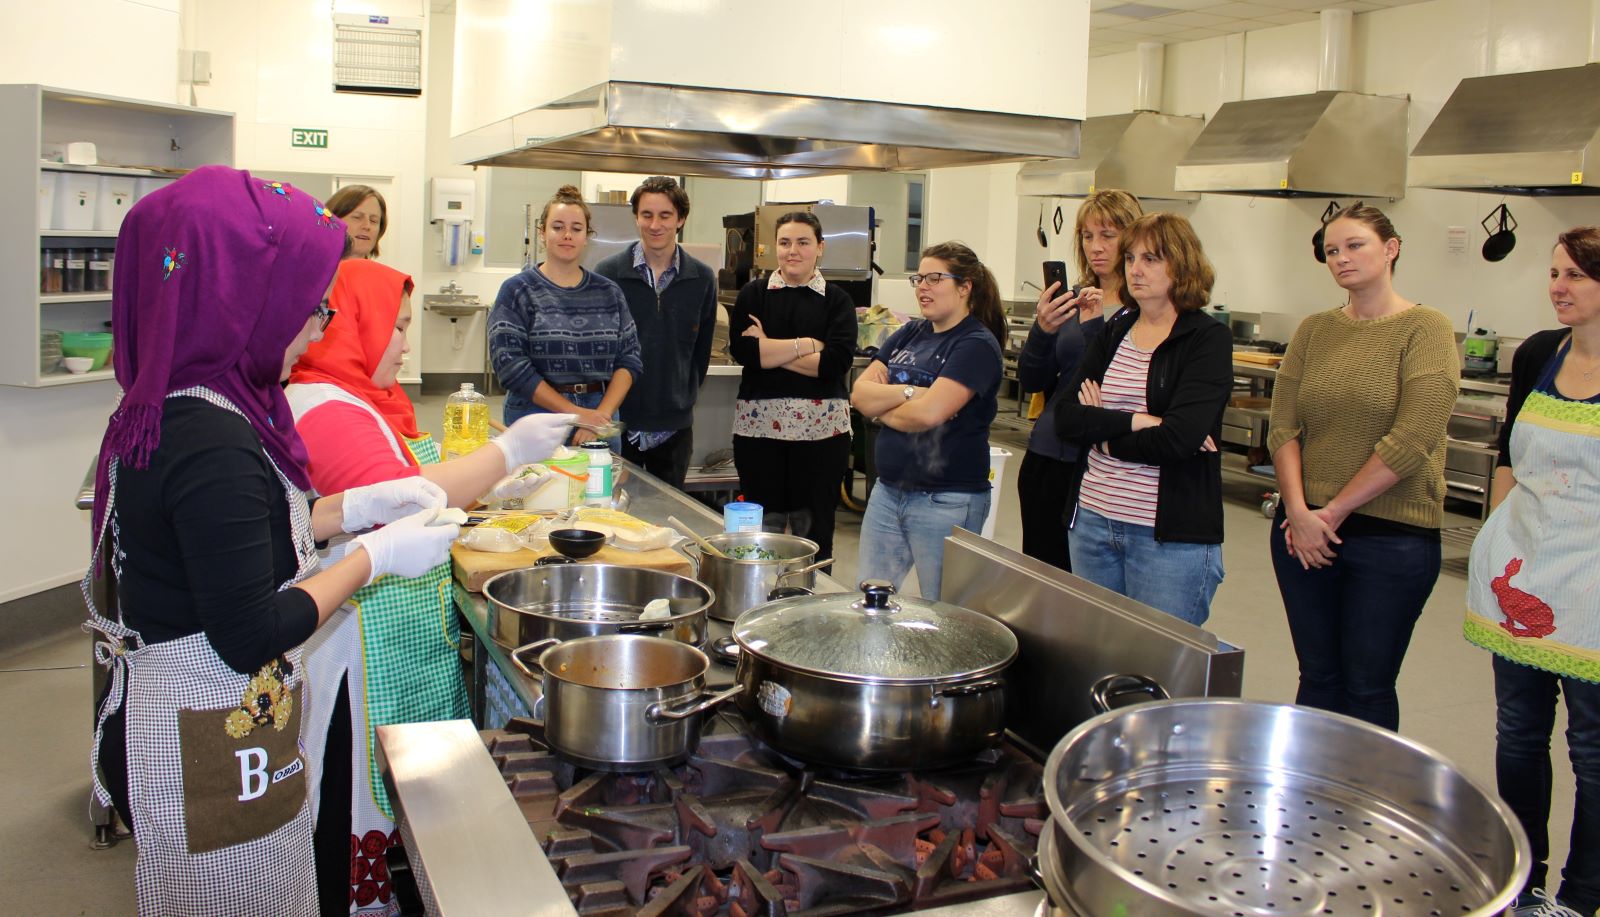 Home Kitchen classes introduce Afghani food at Wintec